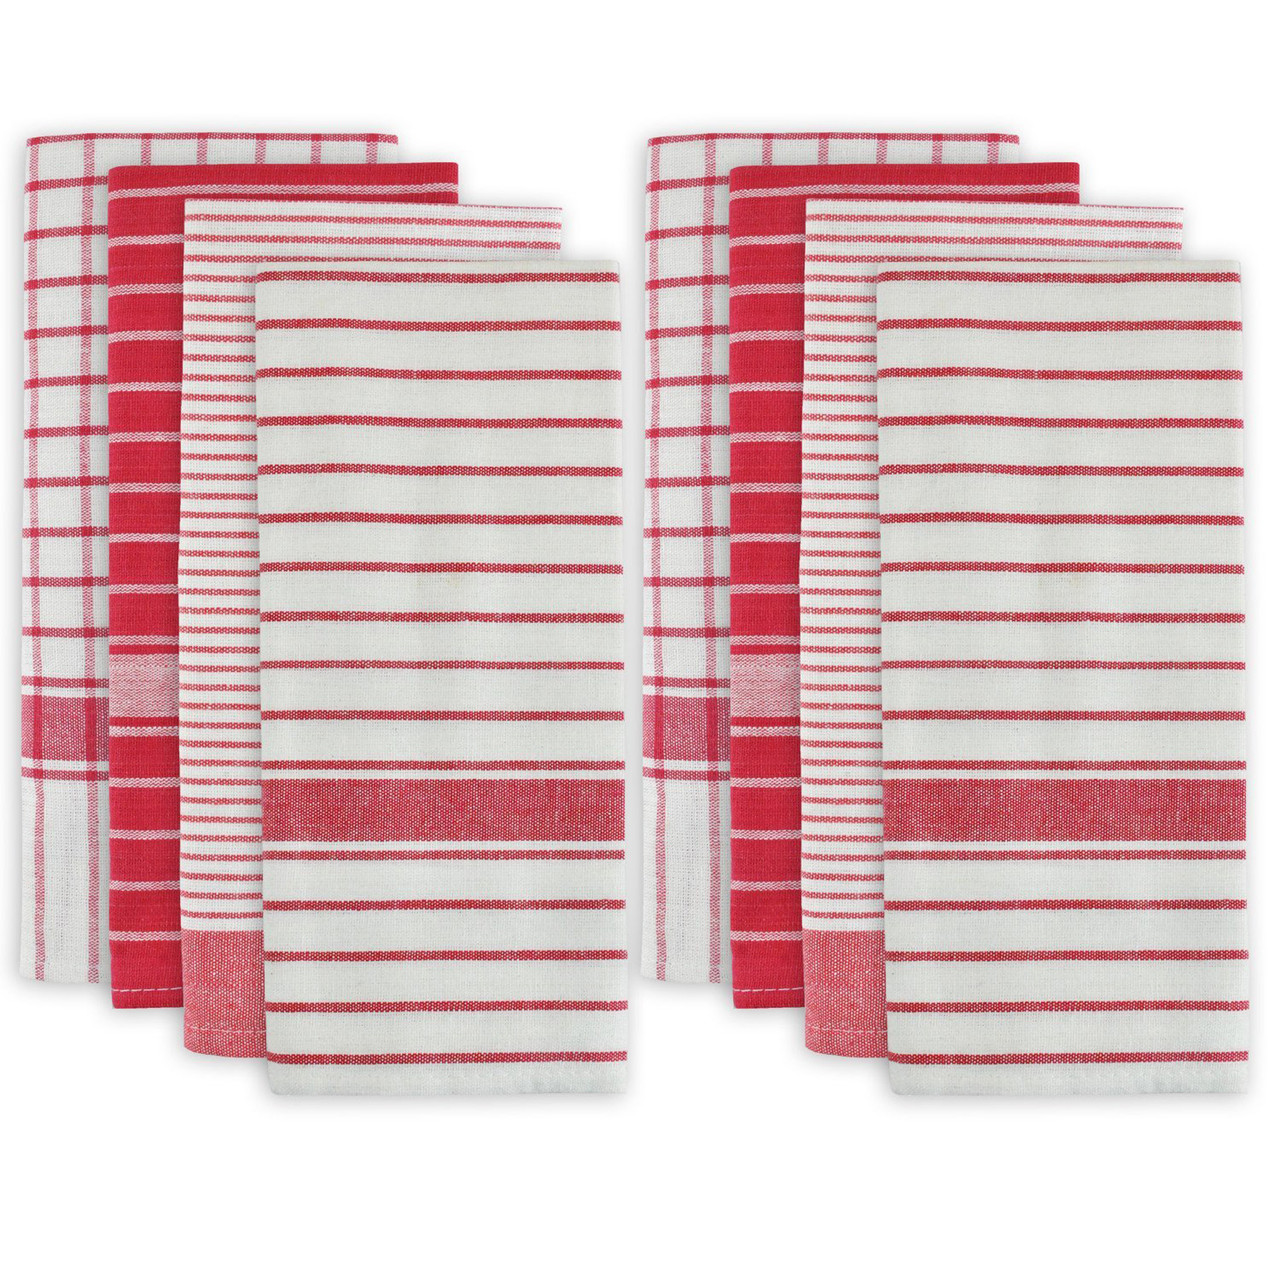 Set of 8 Red & White Striped Rectangular Dish Towels 28